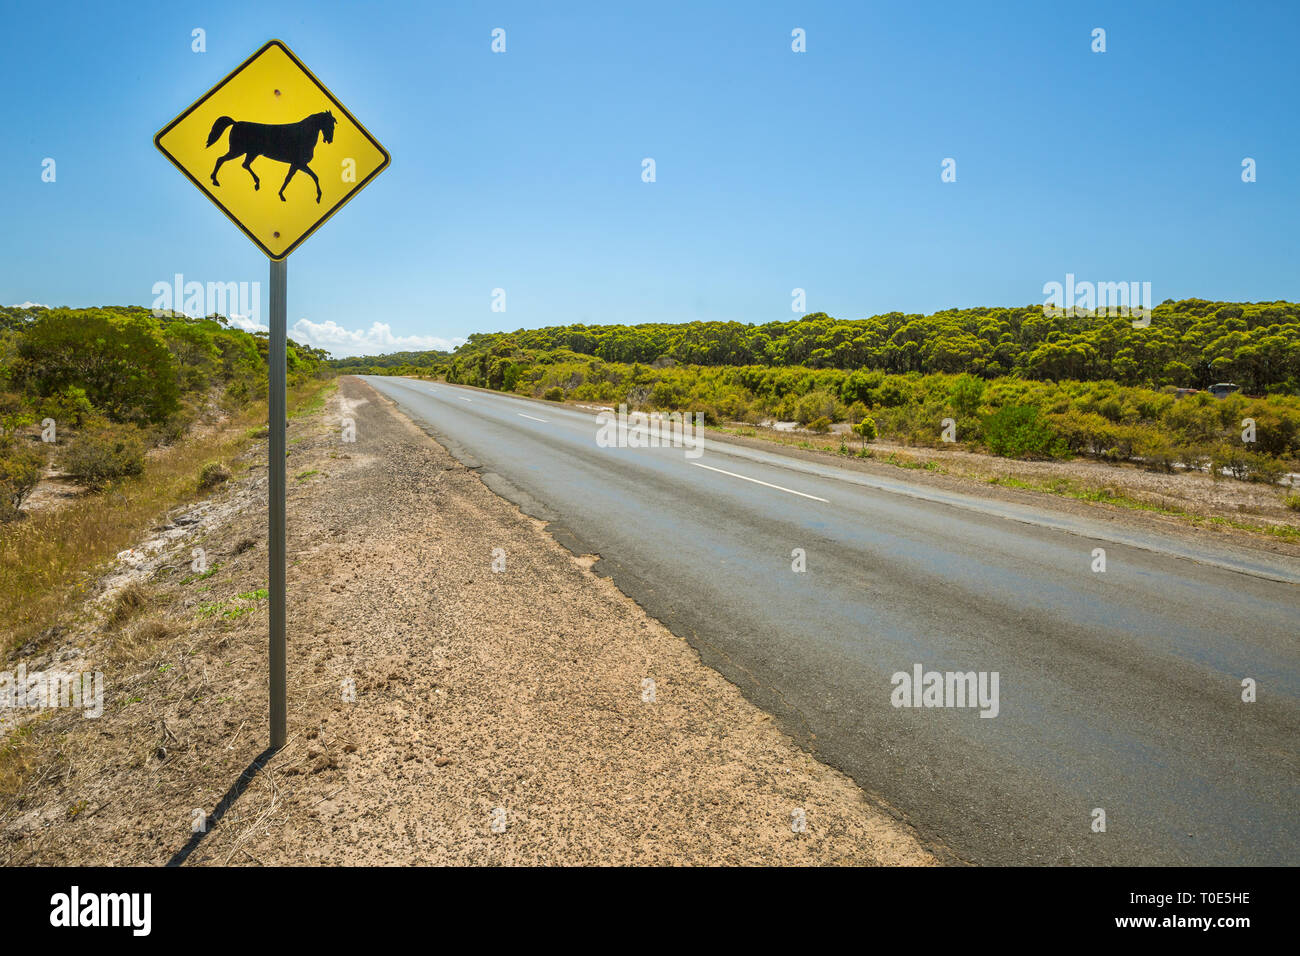 Warning sign for horse crossing on Australian road Stock Photo